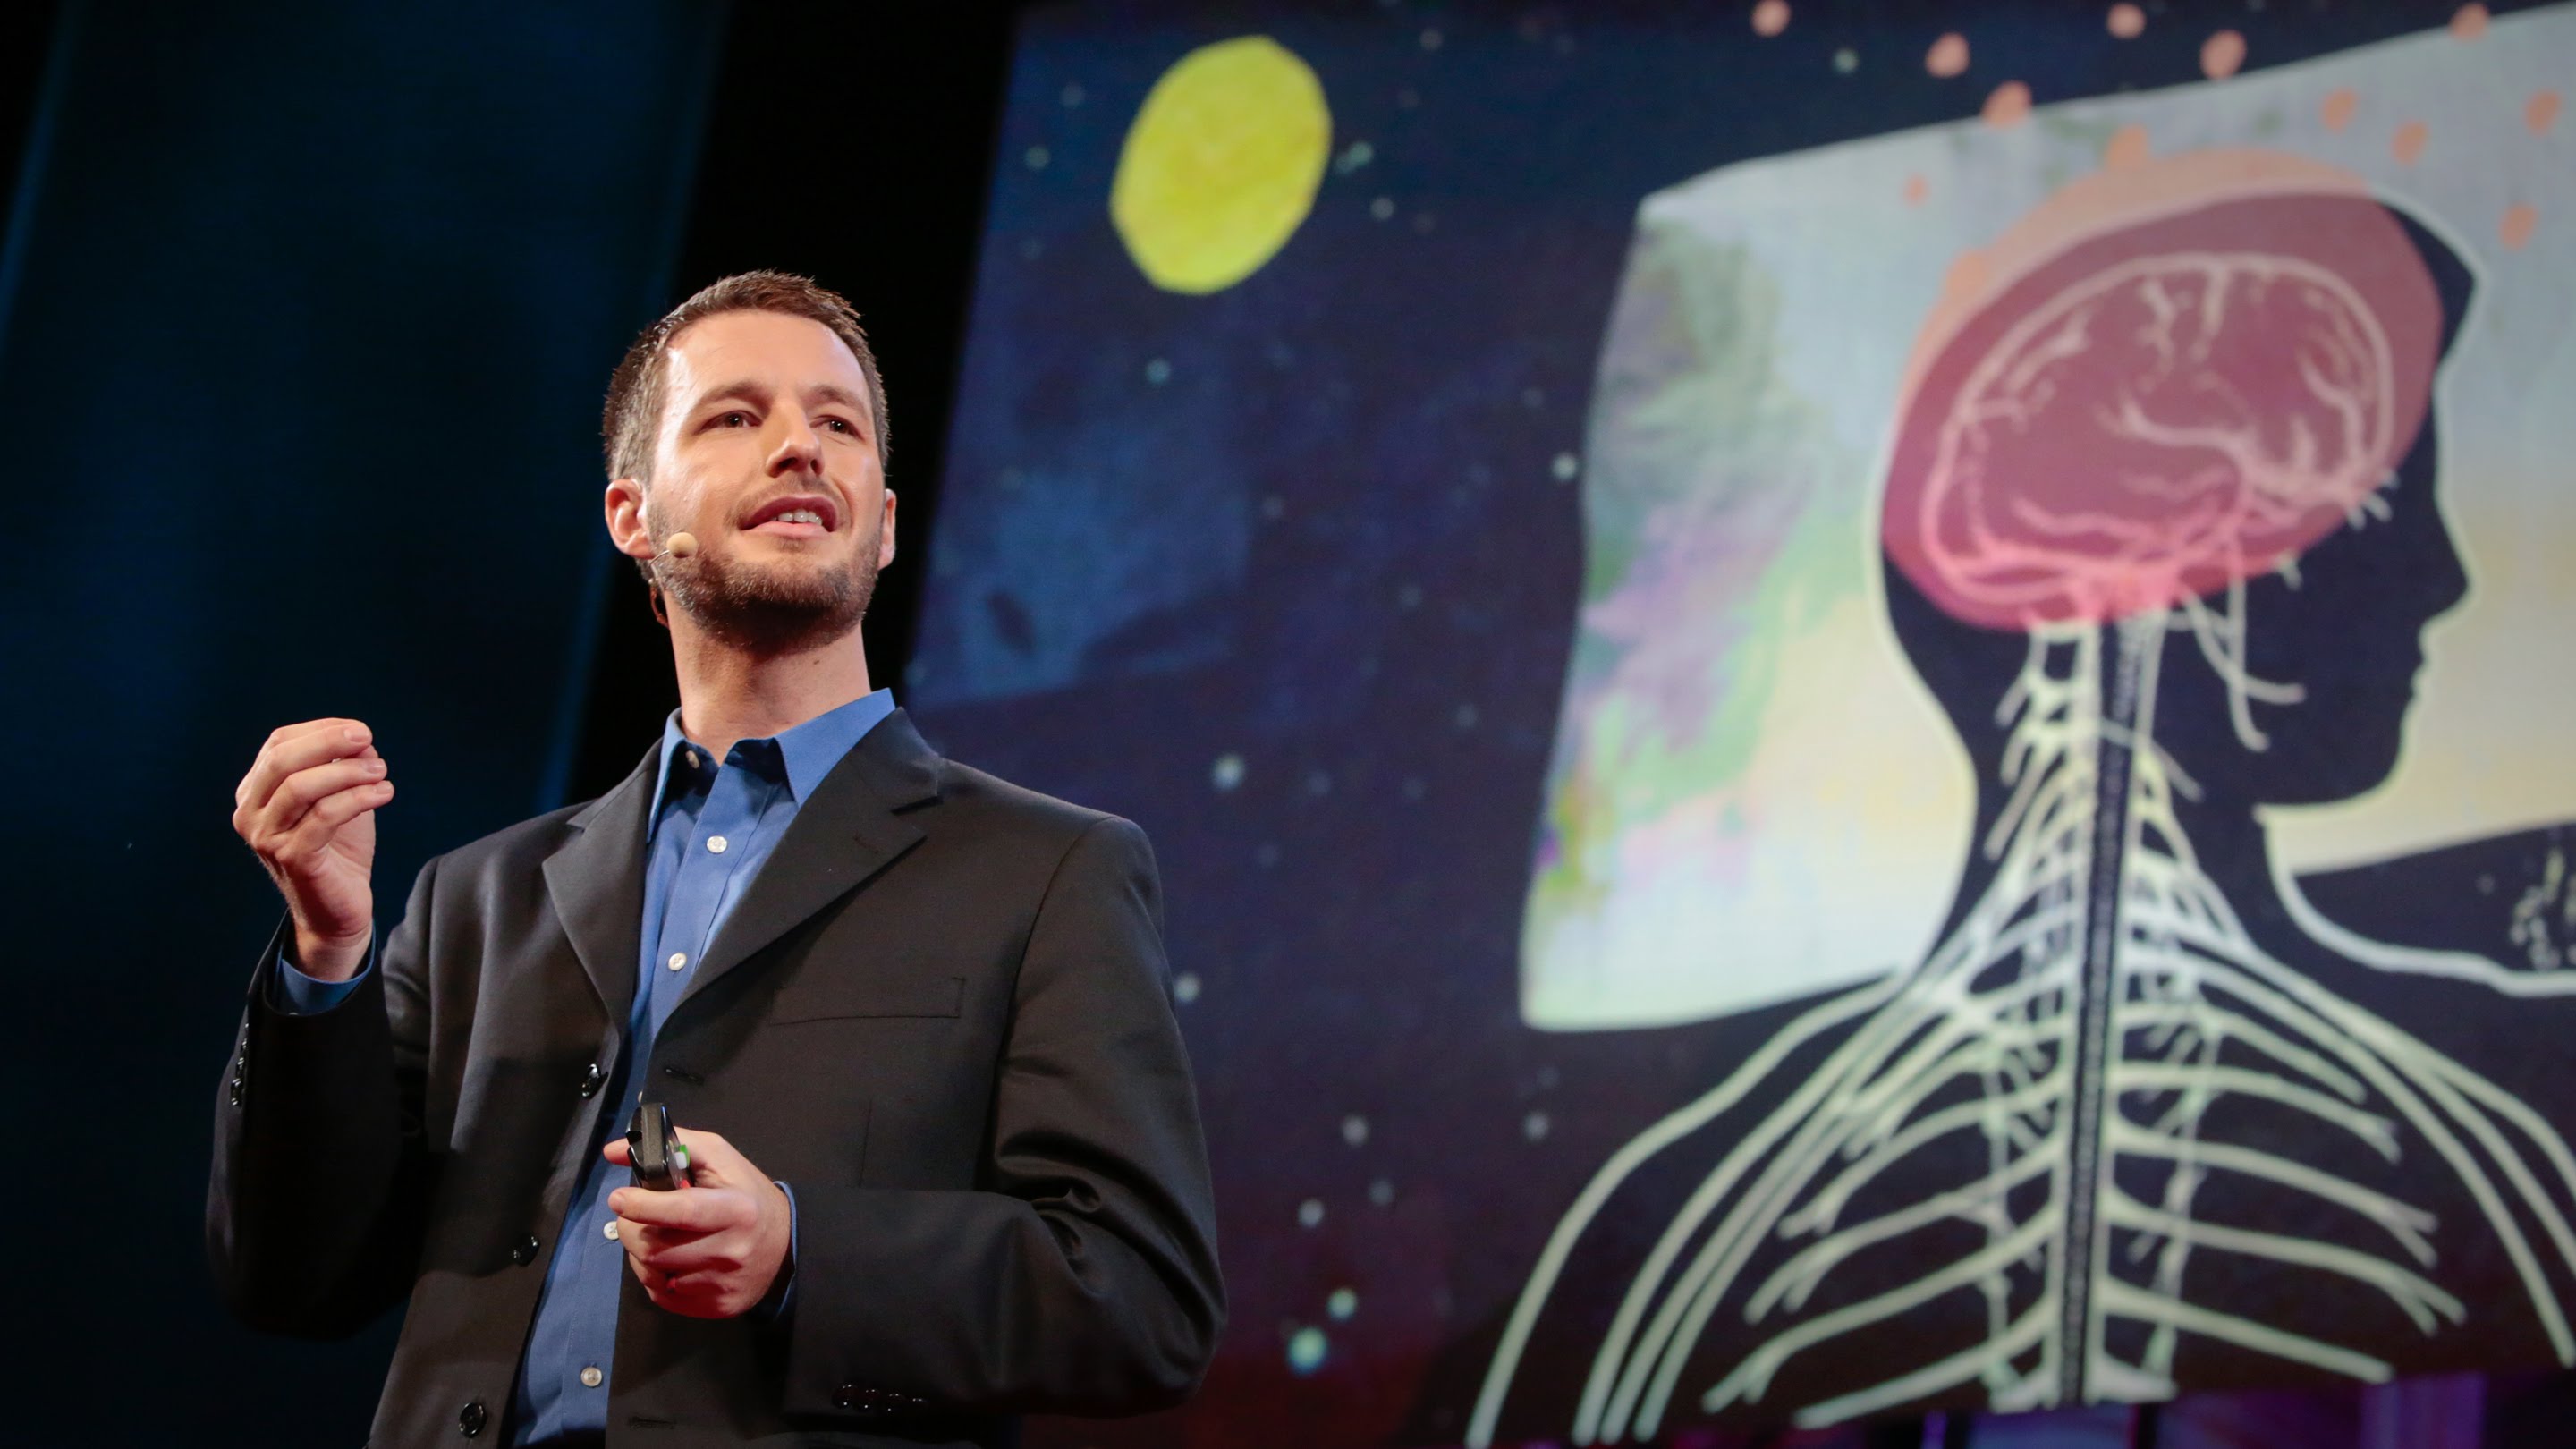 neuroscientist Dr. Jeff Iliff will show you the importance of getting enough sleep